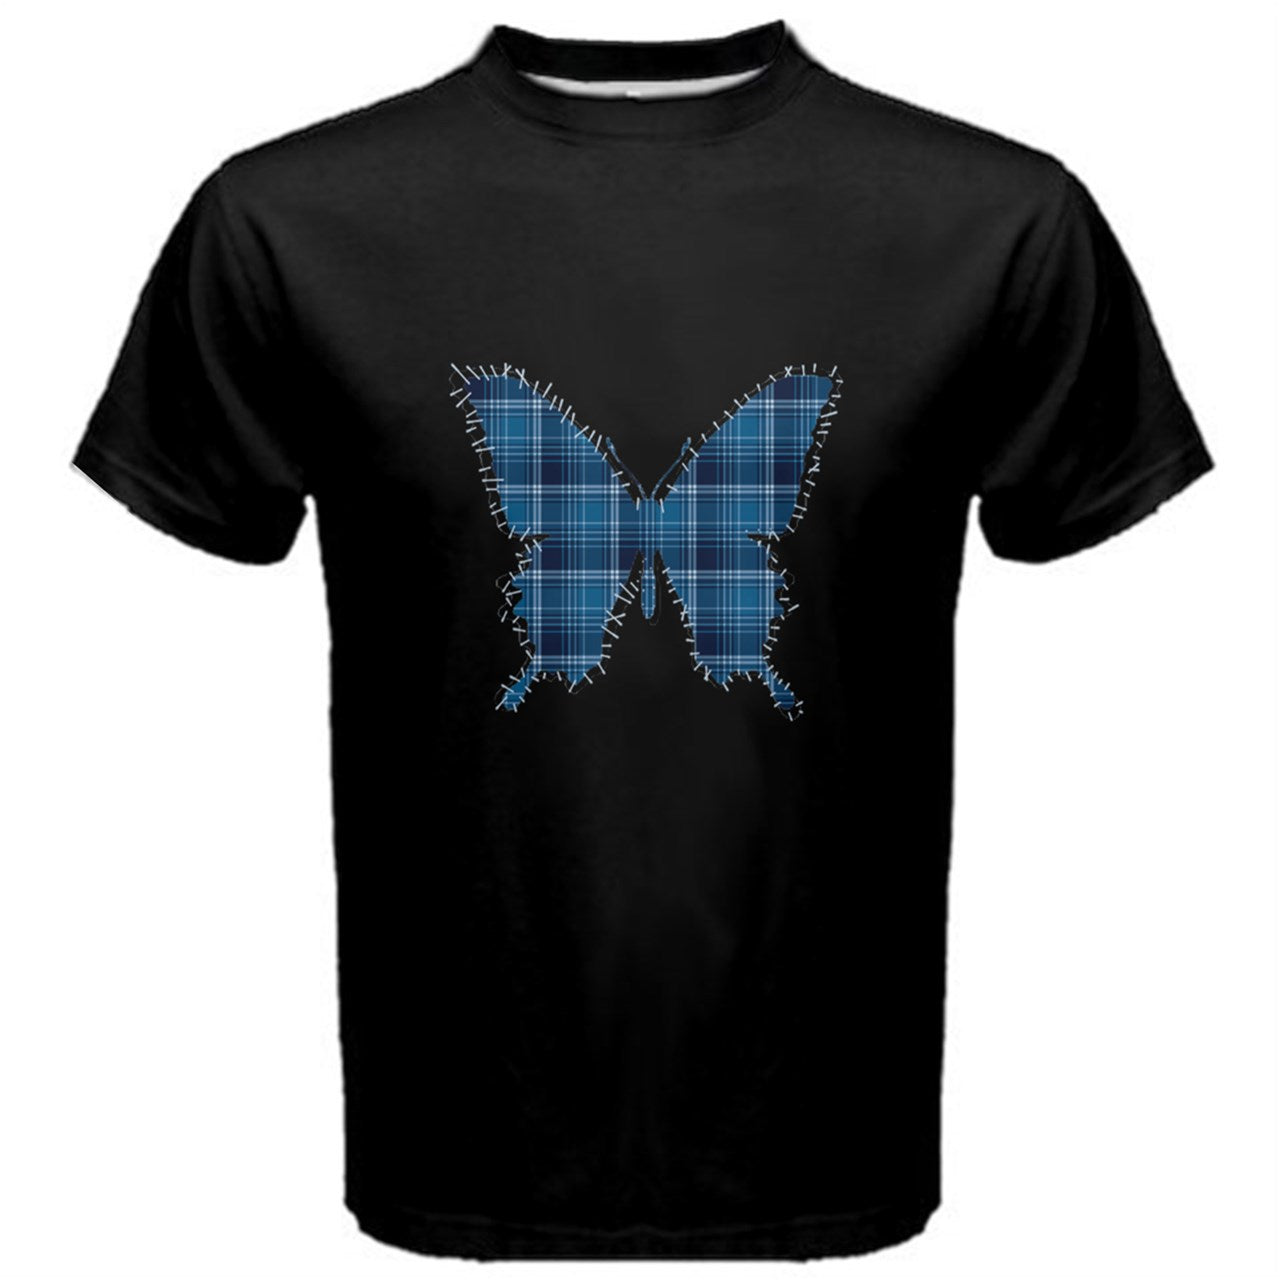 Club X Butterfly Patch Blue Cotton Tee